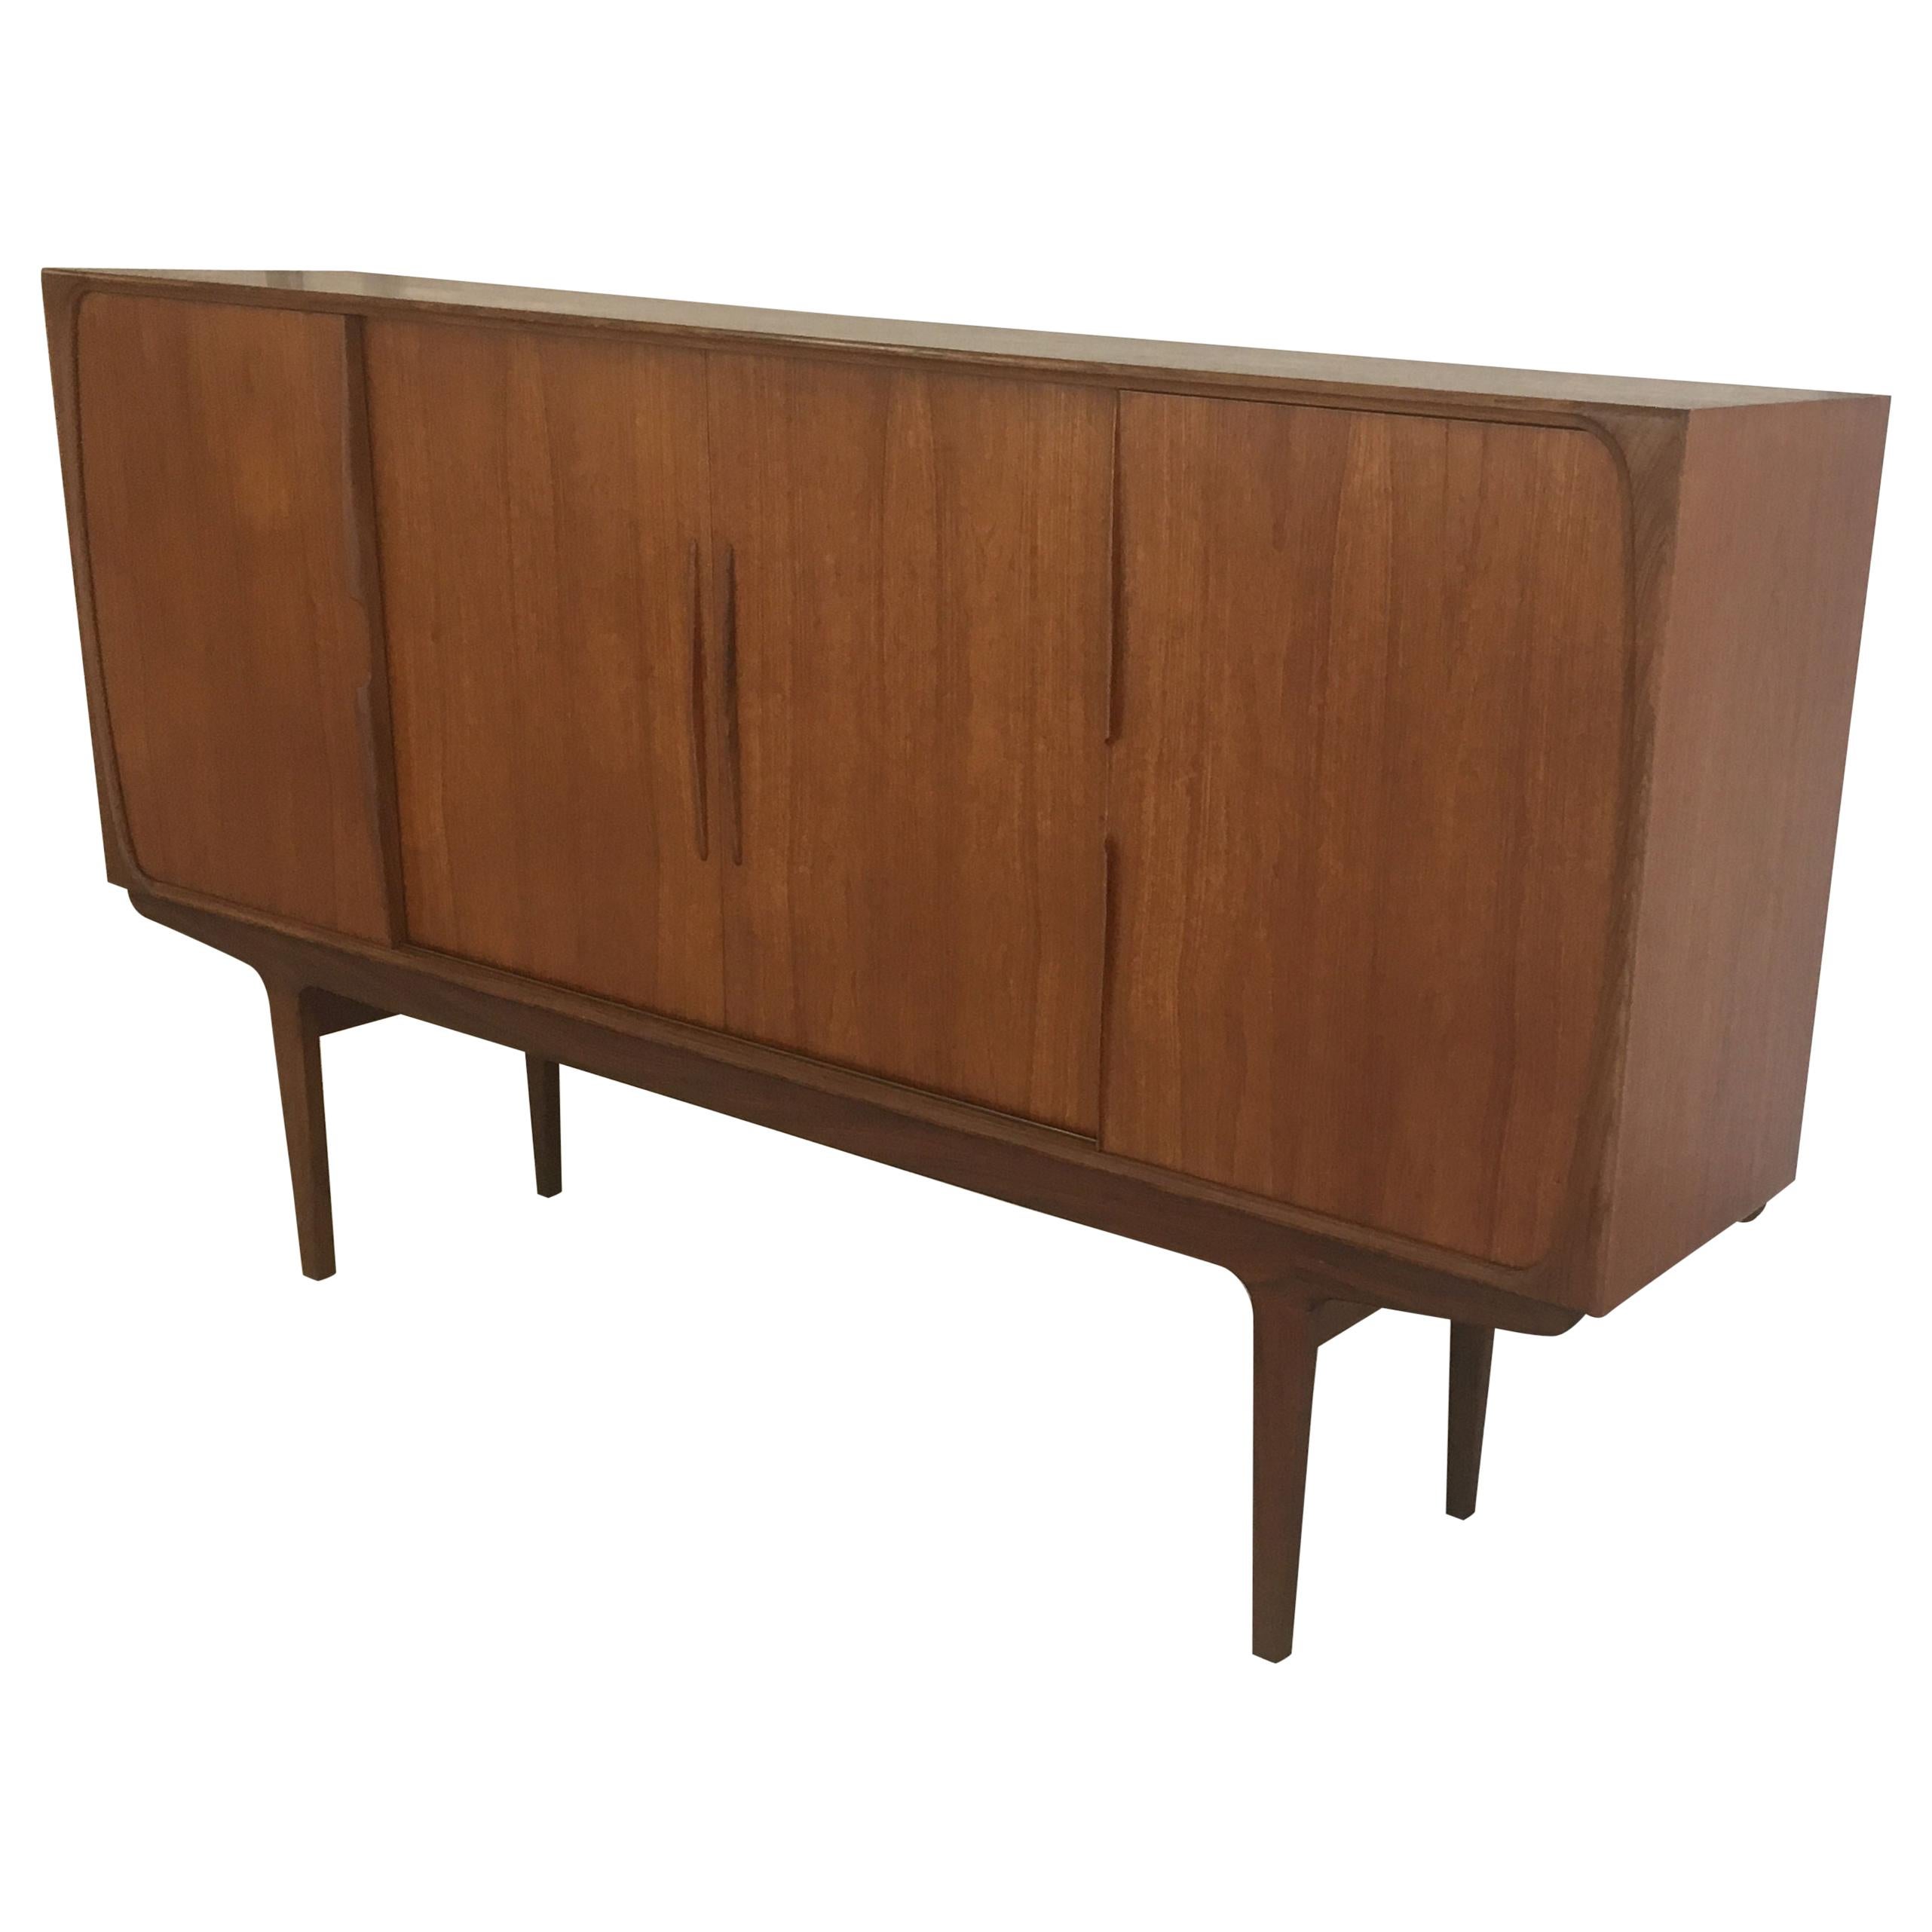 Refinished Danish 1960s Sideboard in Teak with Integrated Bar Section For Sale